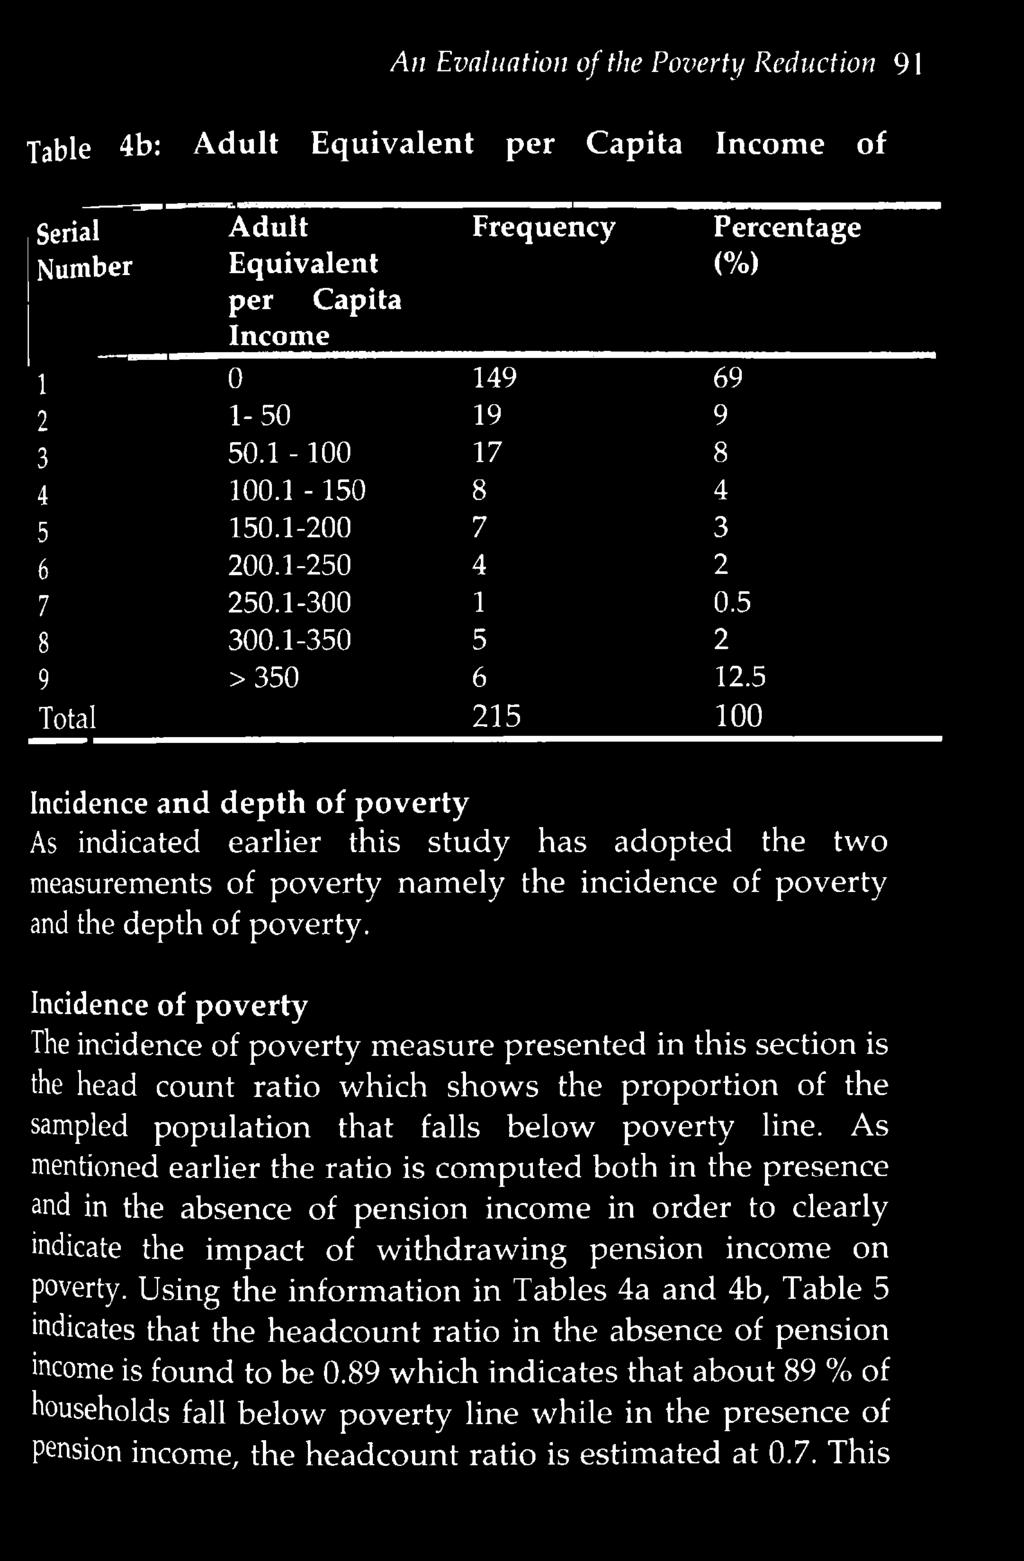 Incidence of poverty The incidence of poverty m easure presented in this section is the head count ratio which show s the proportion of the sampled population that falls below poverty line.